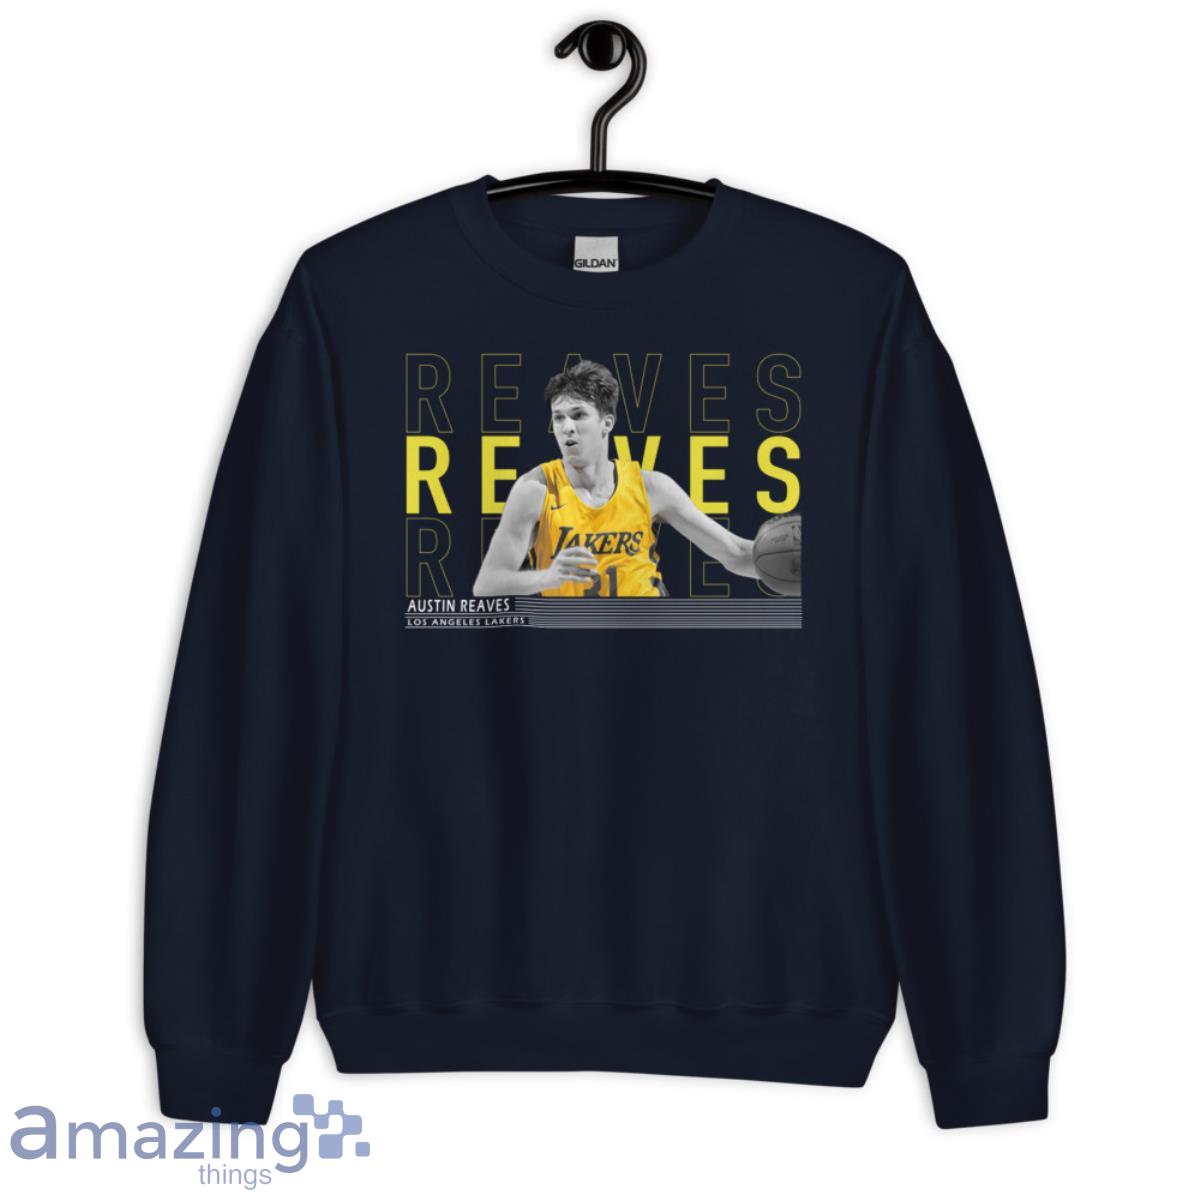 Austin Reaves - Los Angeles Lakers - Game-Worn Statement Edition